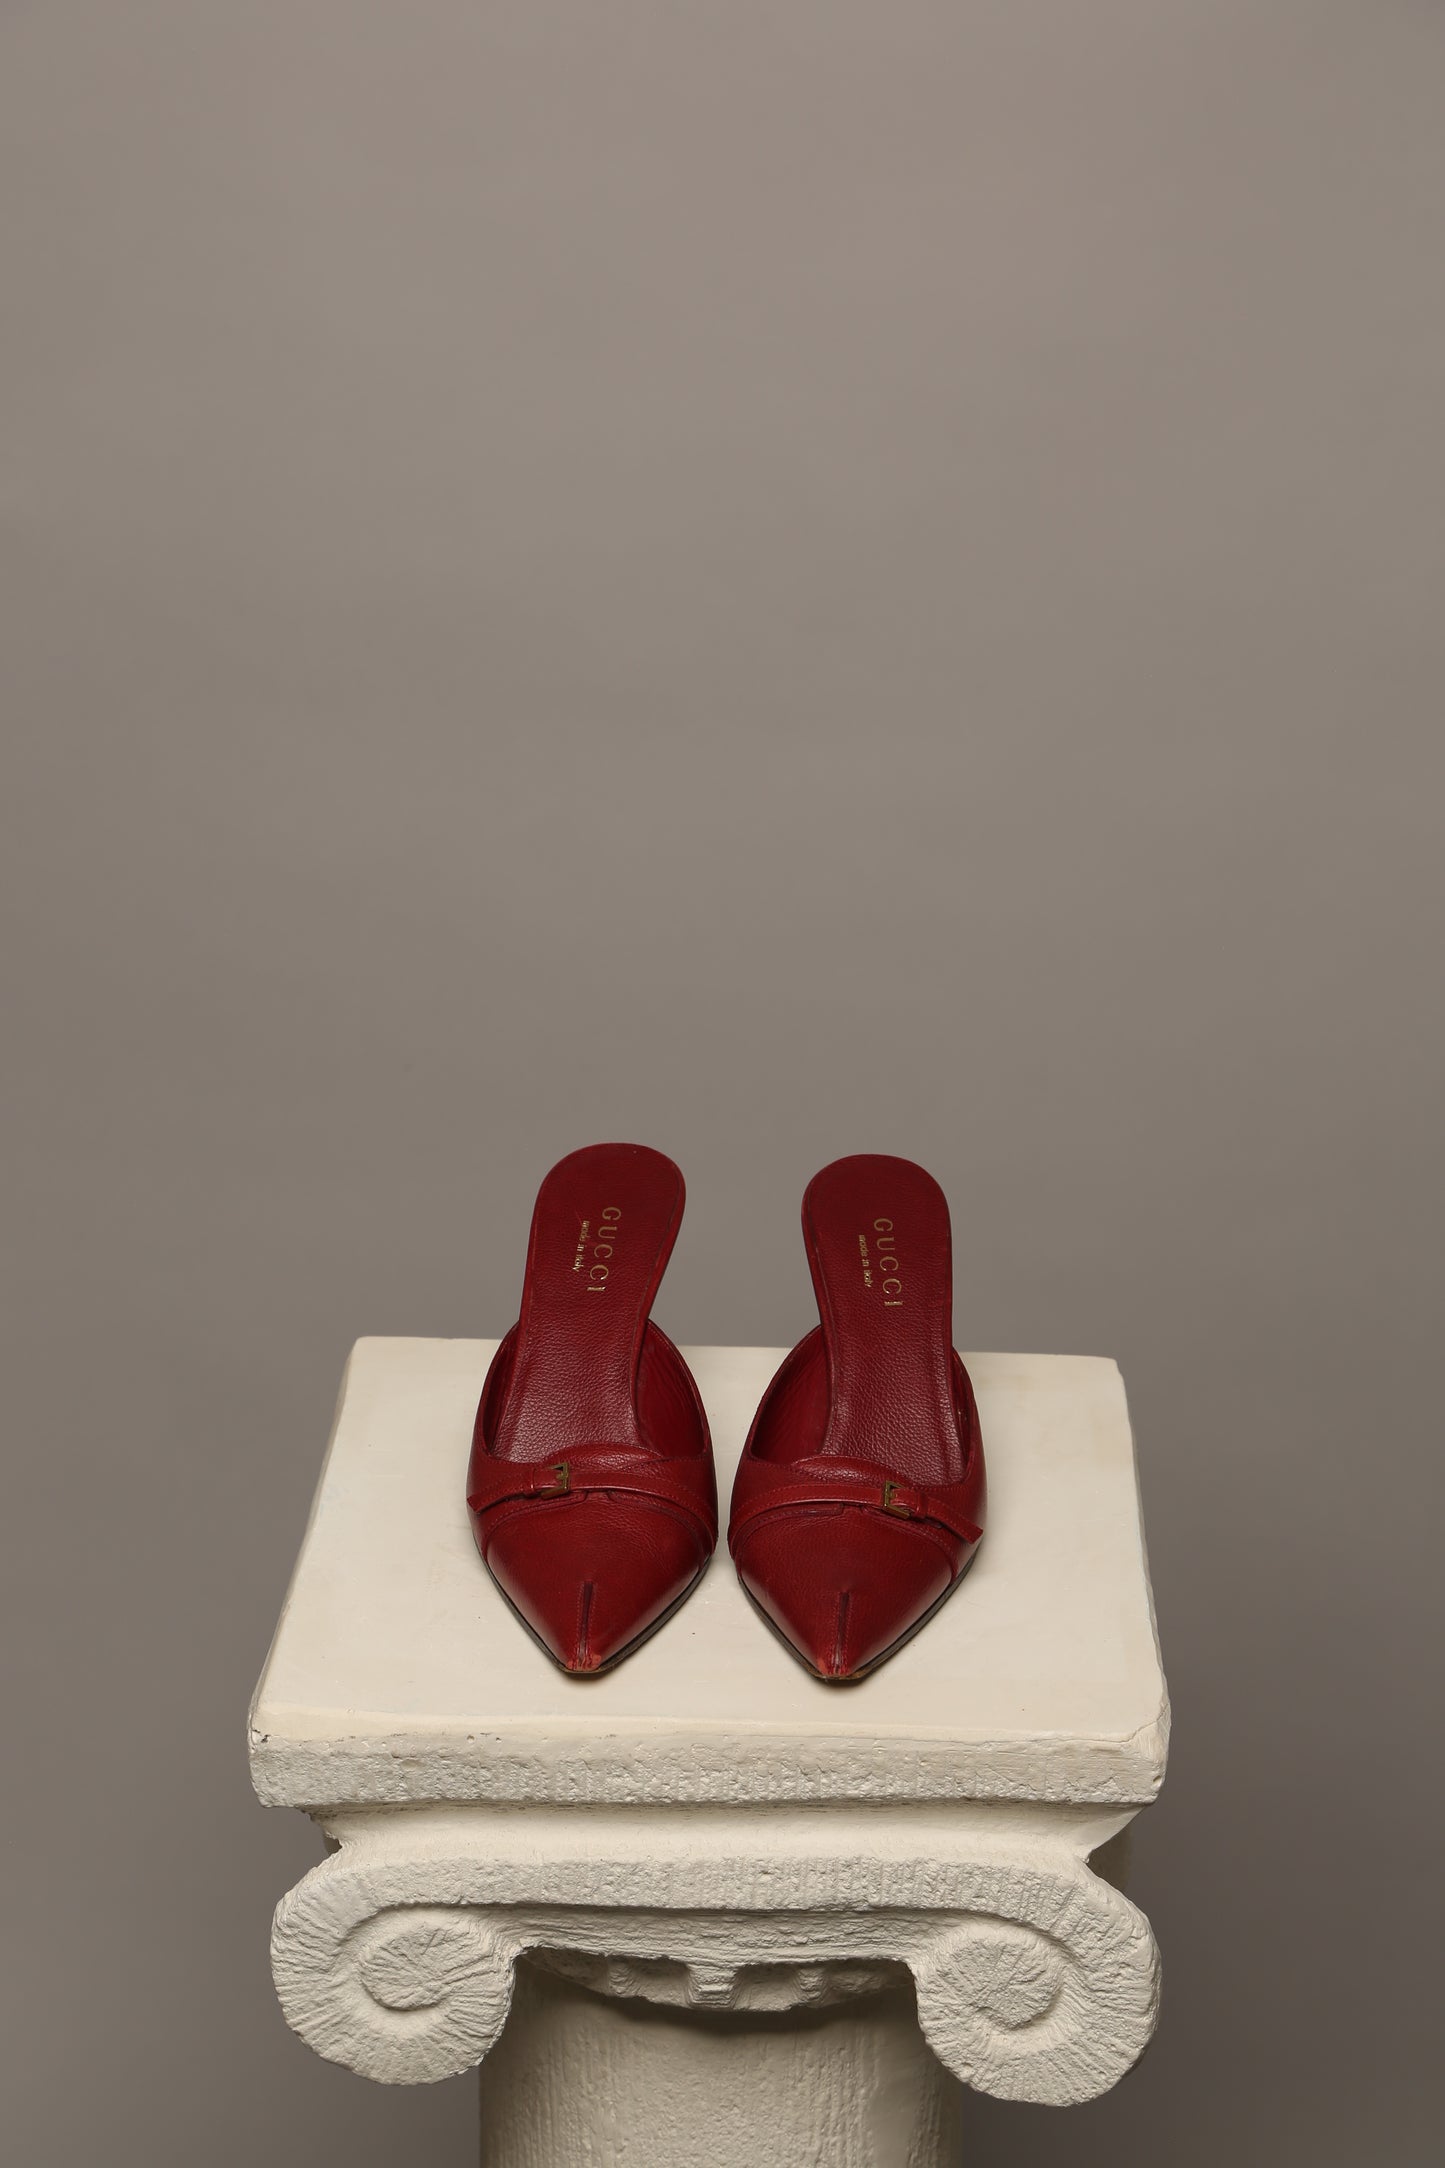 Extremely Rare GUCCI Burgundy Mules